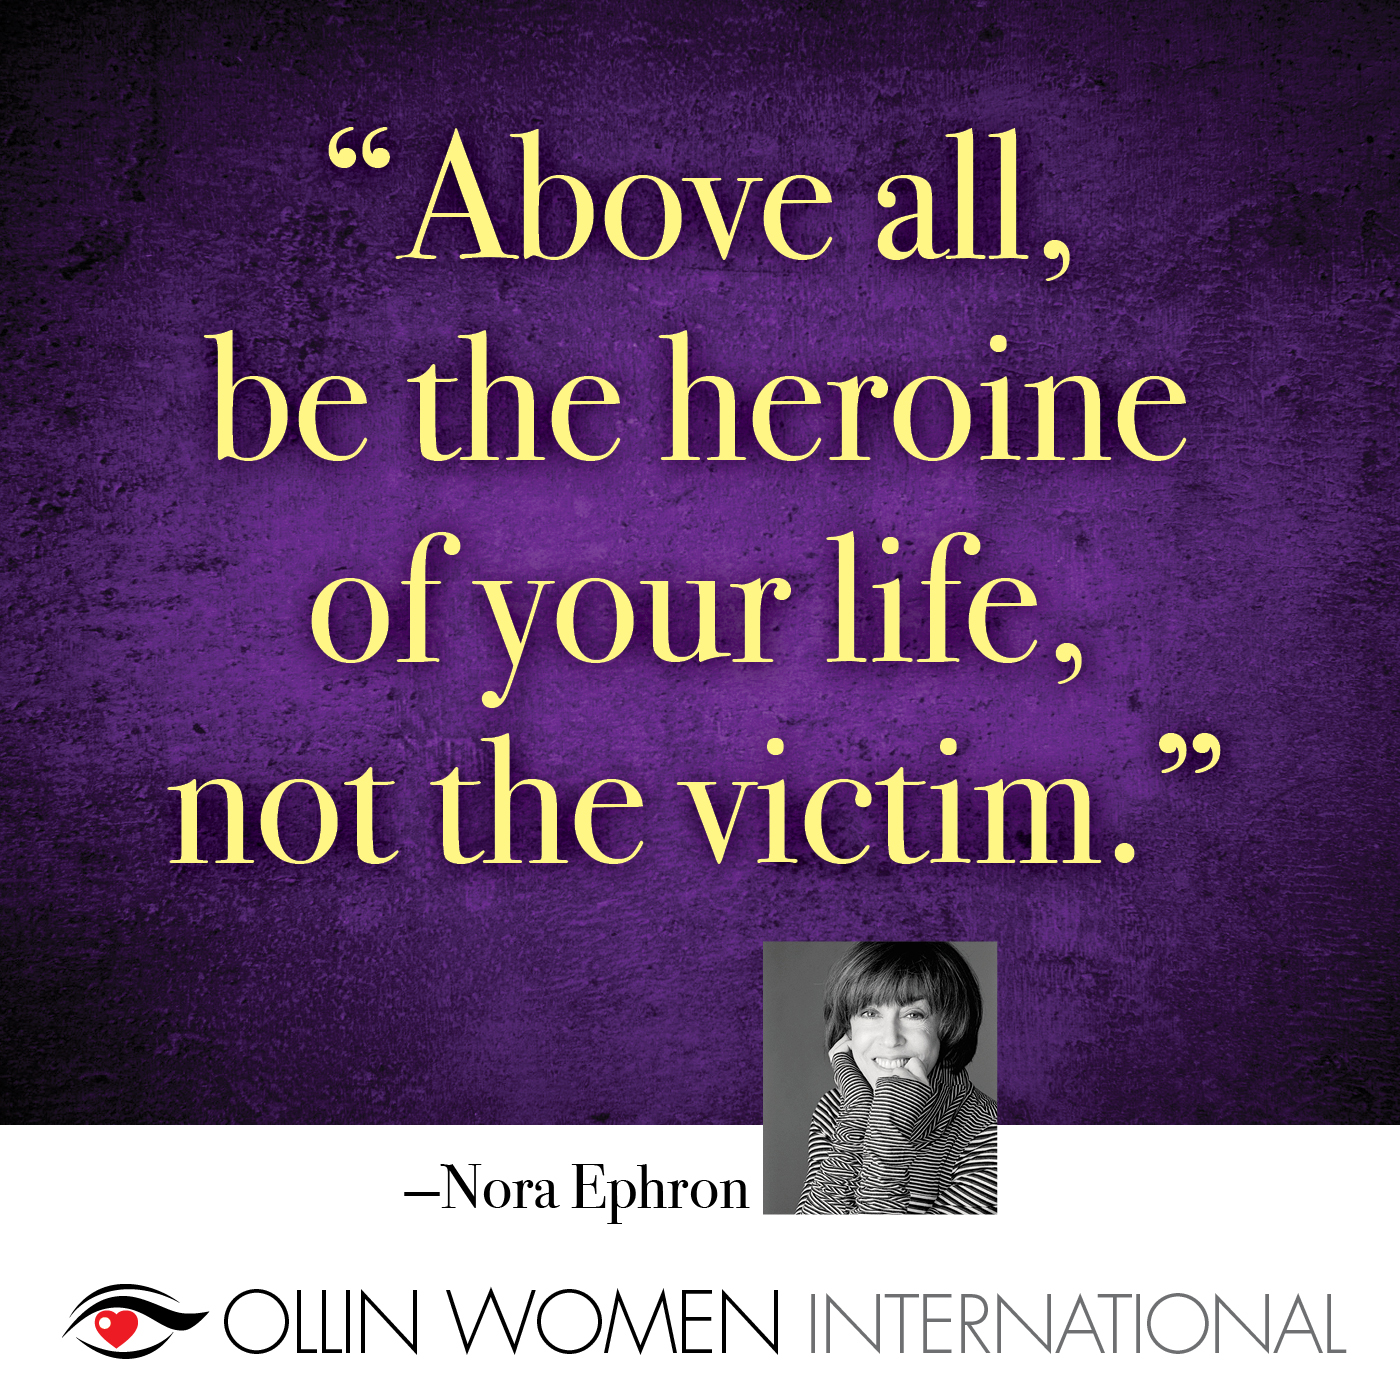 Nora Ephron - Above all, be the heroine of your life, not the victim